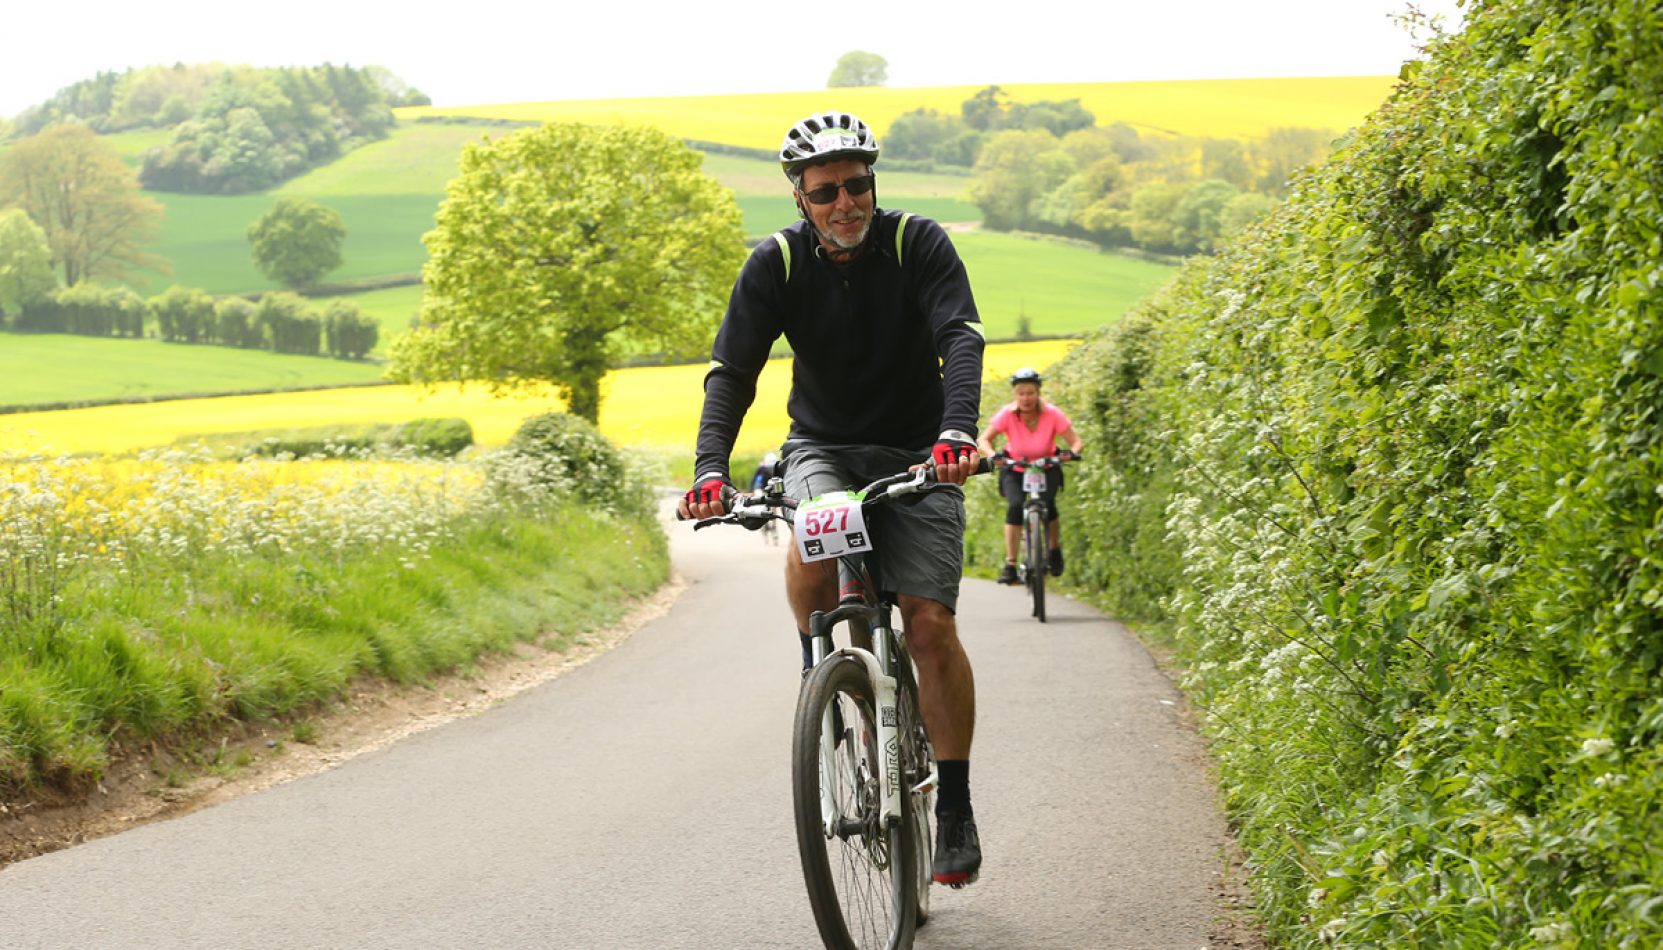 kellys cycle challenge, sports, cycling, may 2023, whats on this week, guide to whats on this week, guide to surrey, guildford, farnham, woking, where to go, things to do